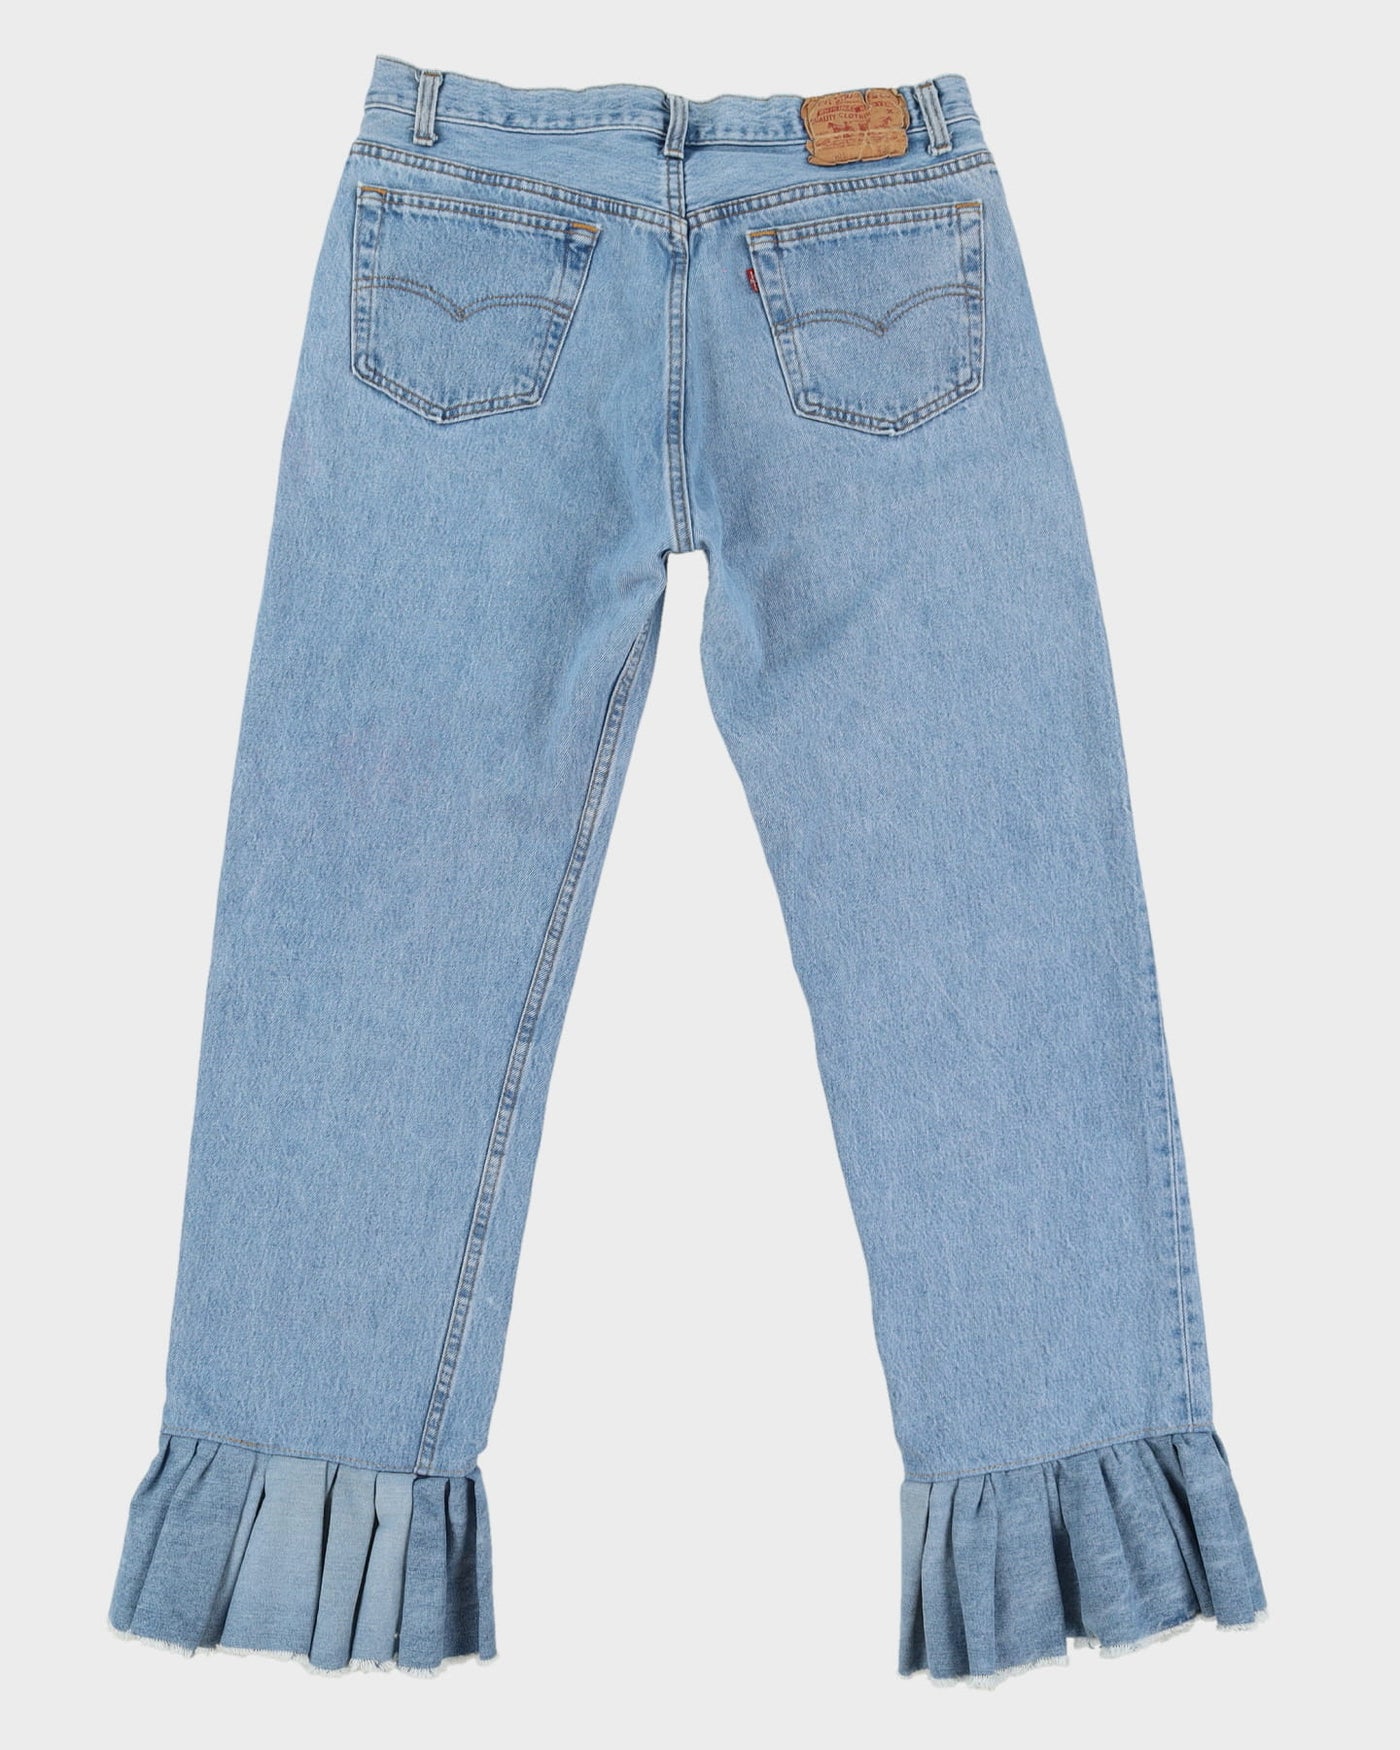 Rokit Originals Reworked Dolly Blue Jeans - W34 L32